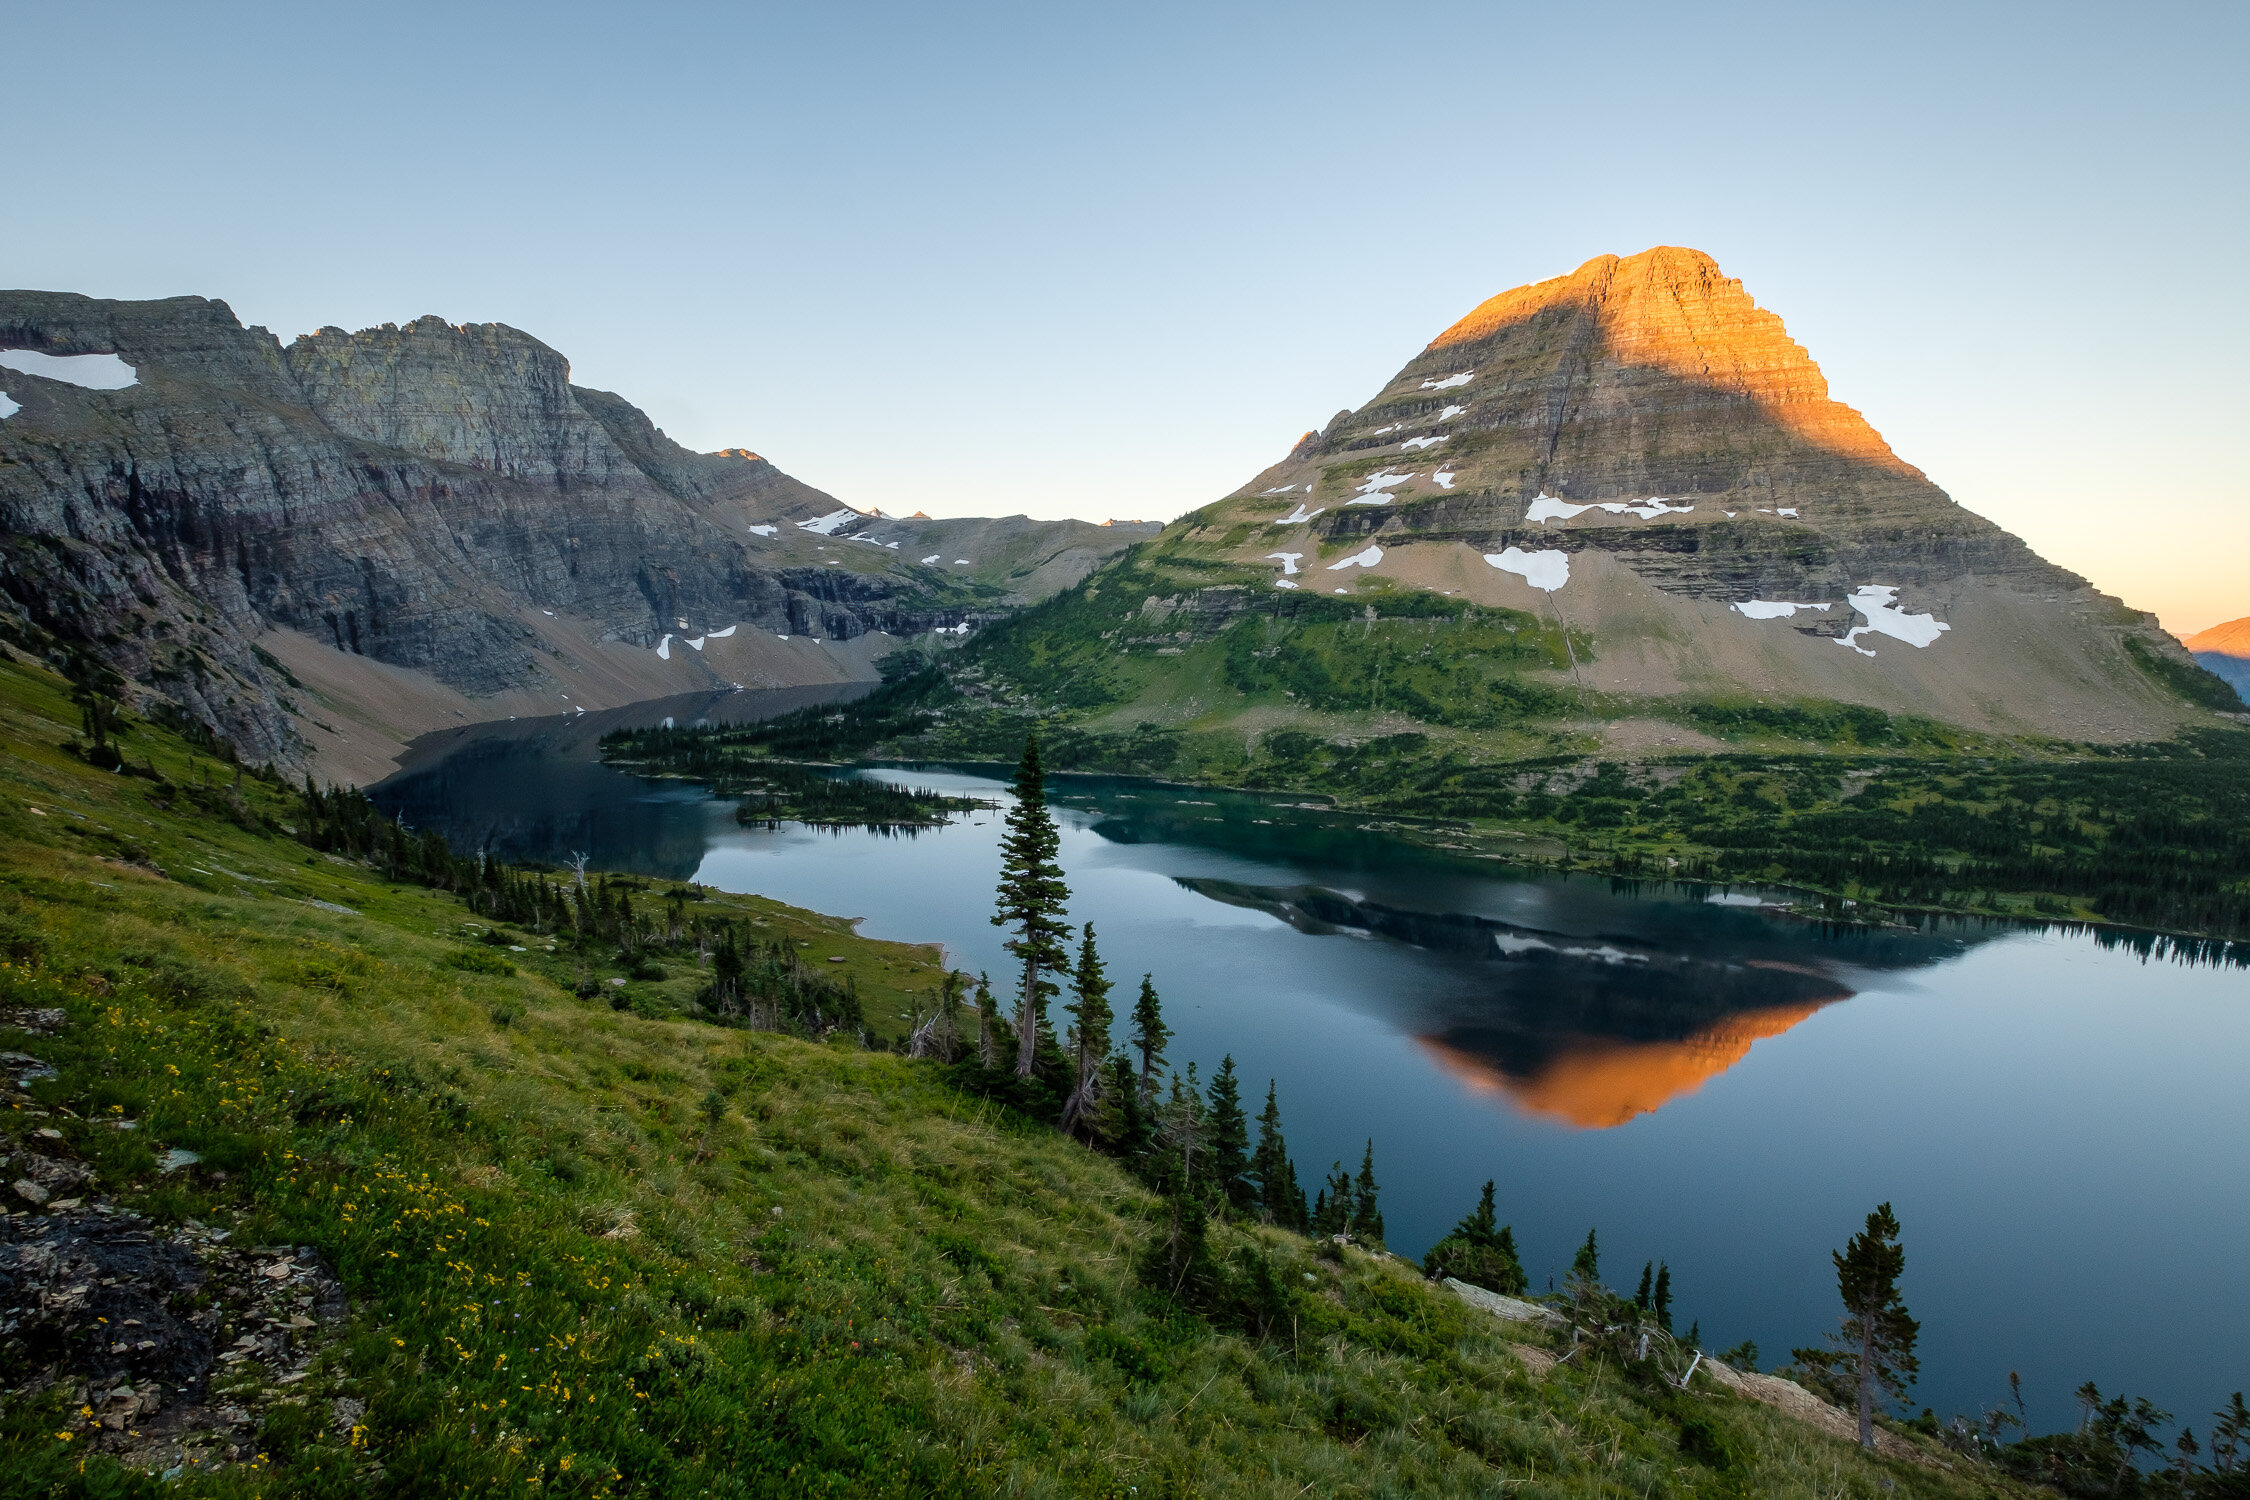  Sunrise on Bearhat mountain, a classic view near the Continental Divide in Glacier National Park 